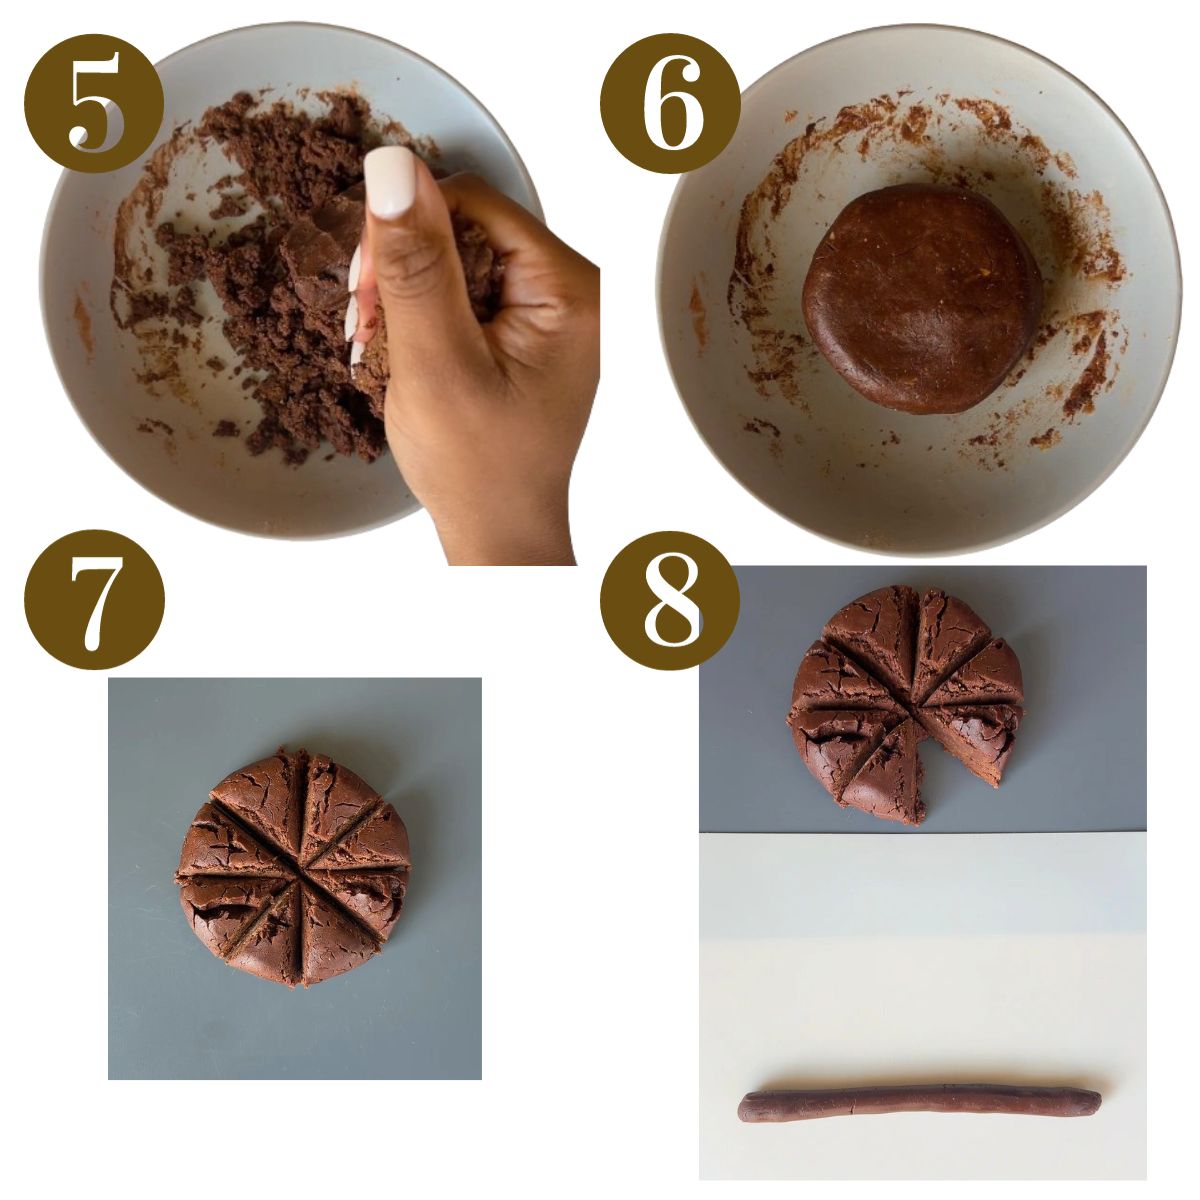 Steps to make homemade cocoa puffs.